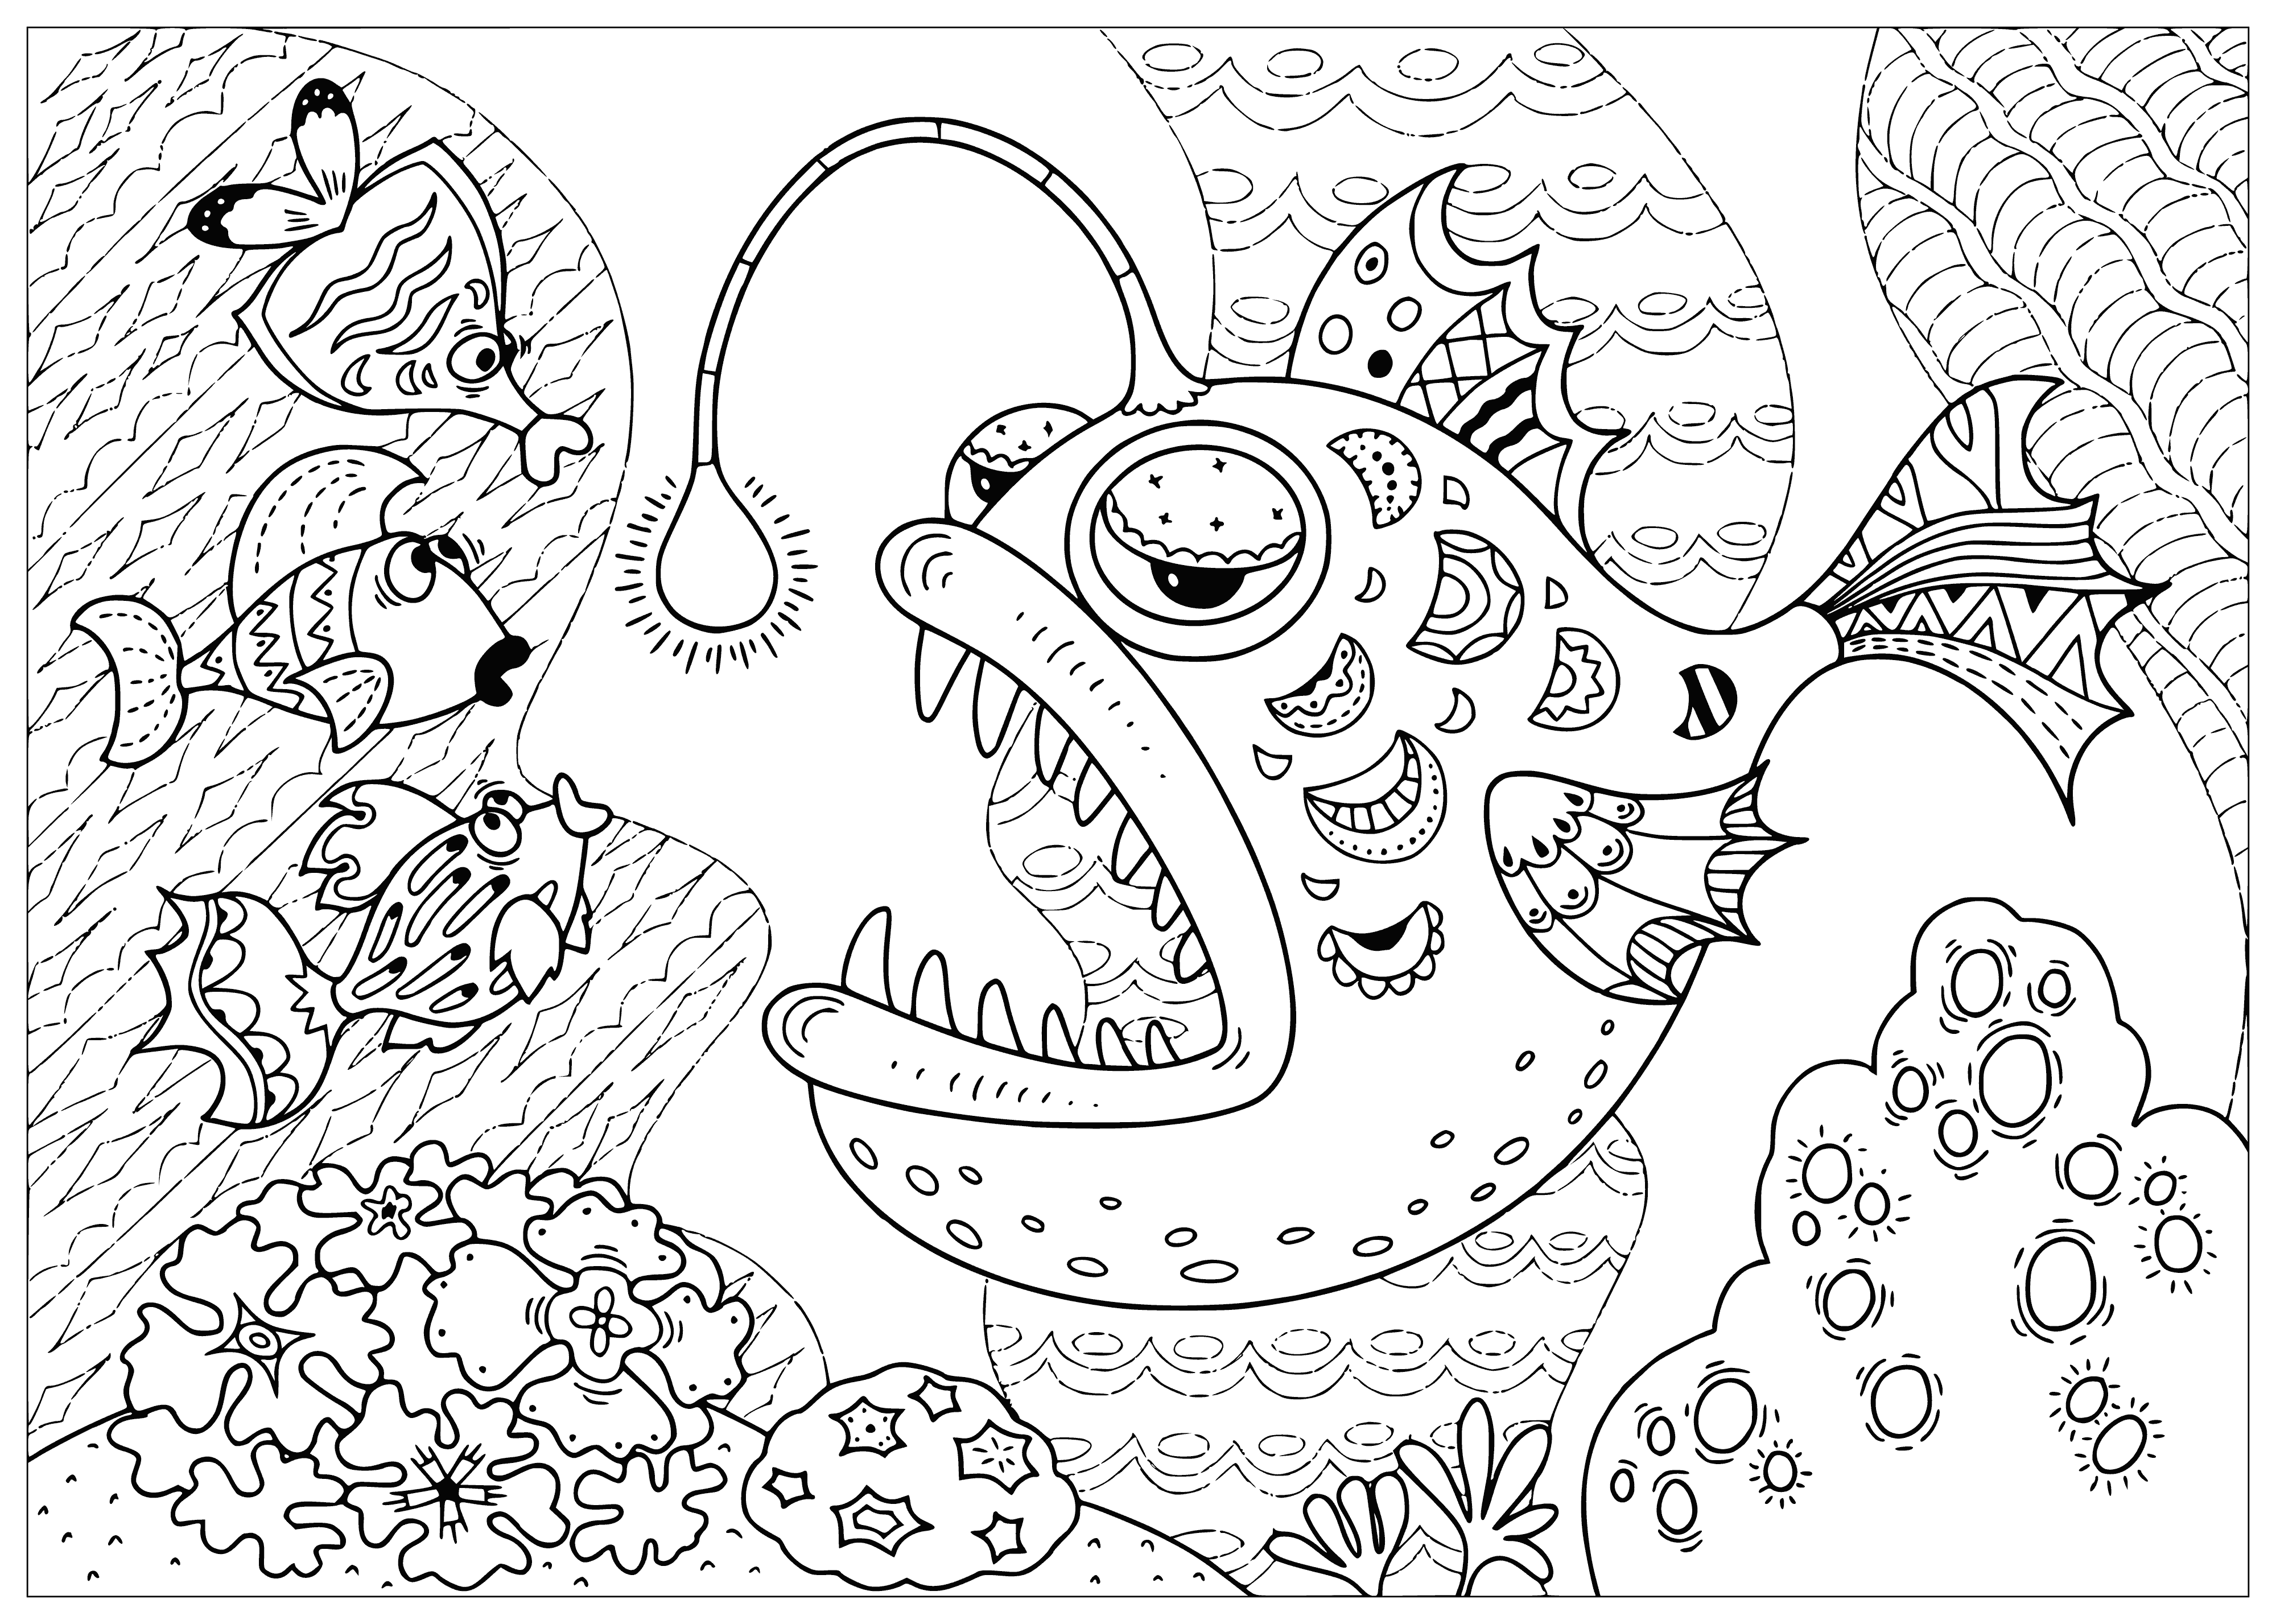 Angler coloring page